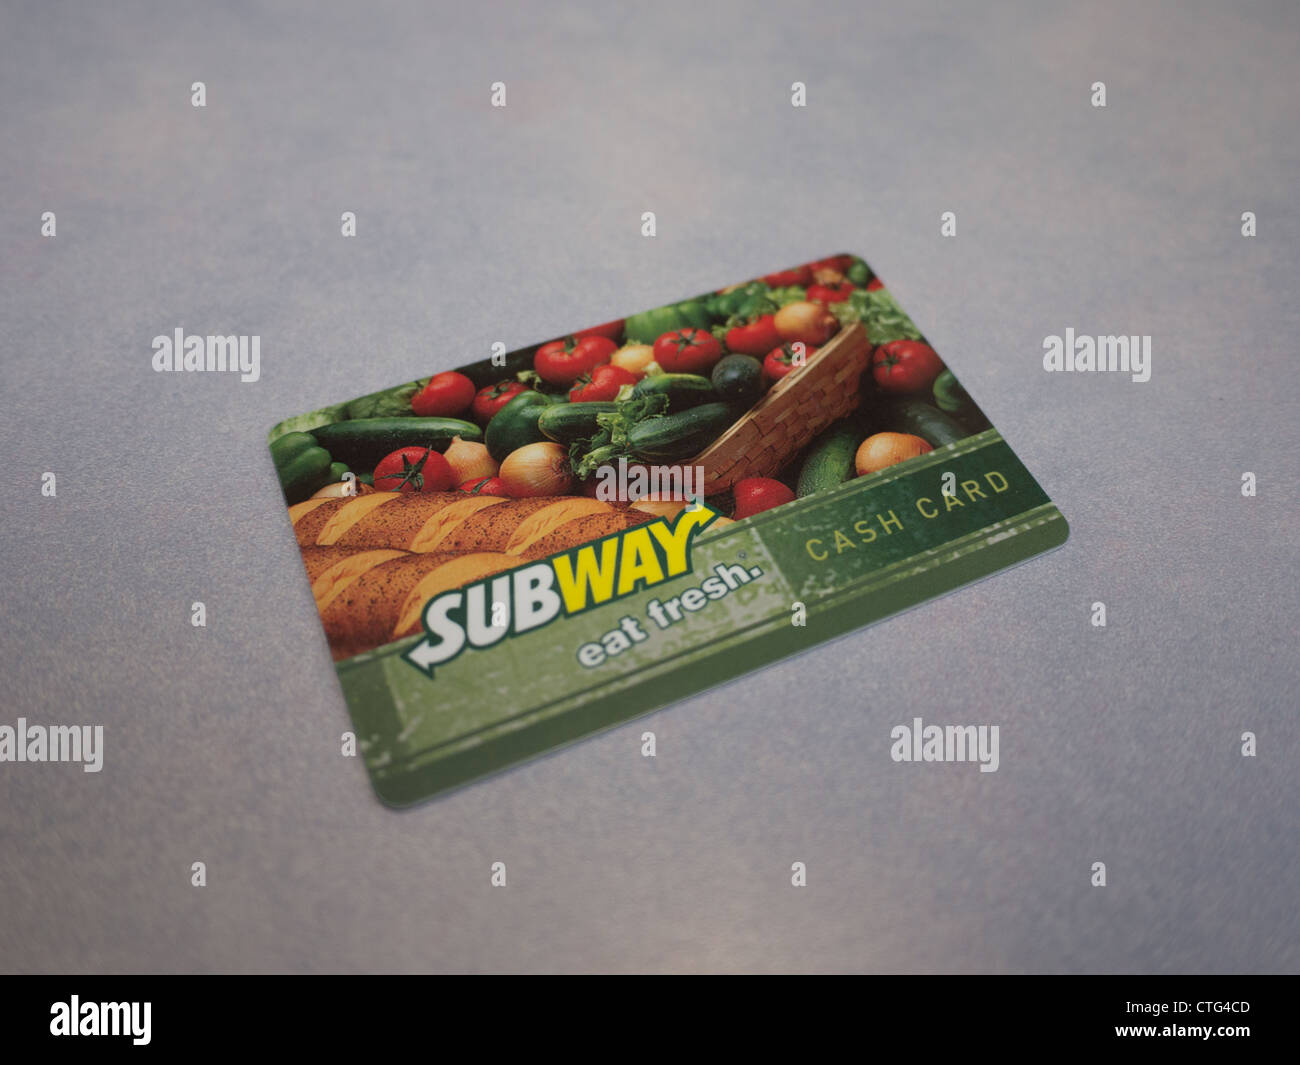 subway gift cash card table Stock Photo